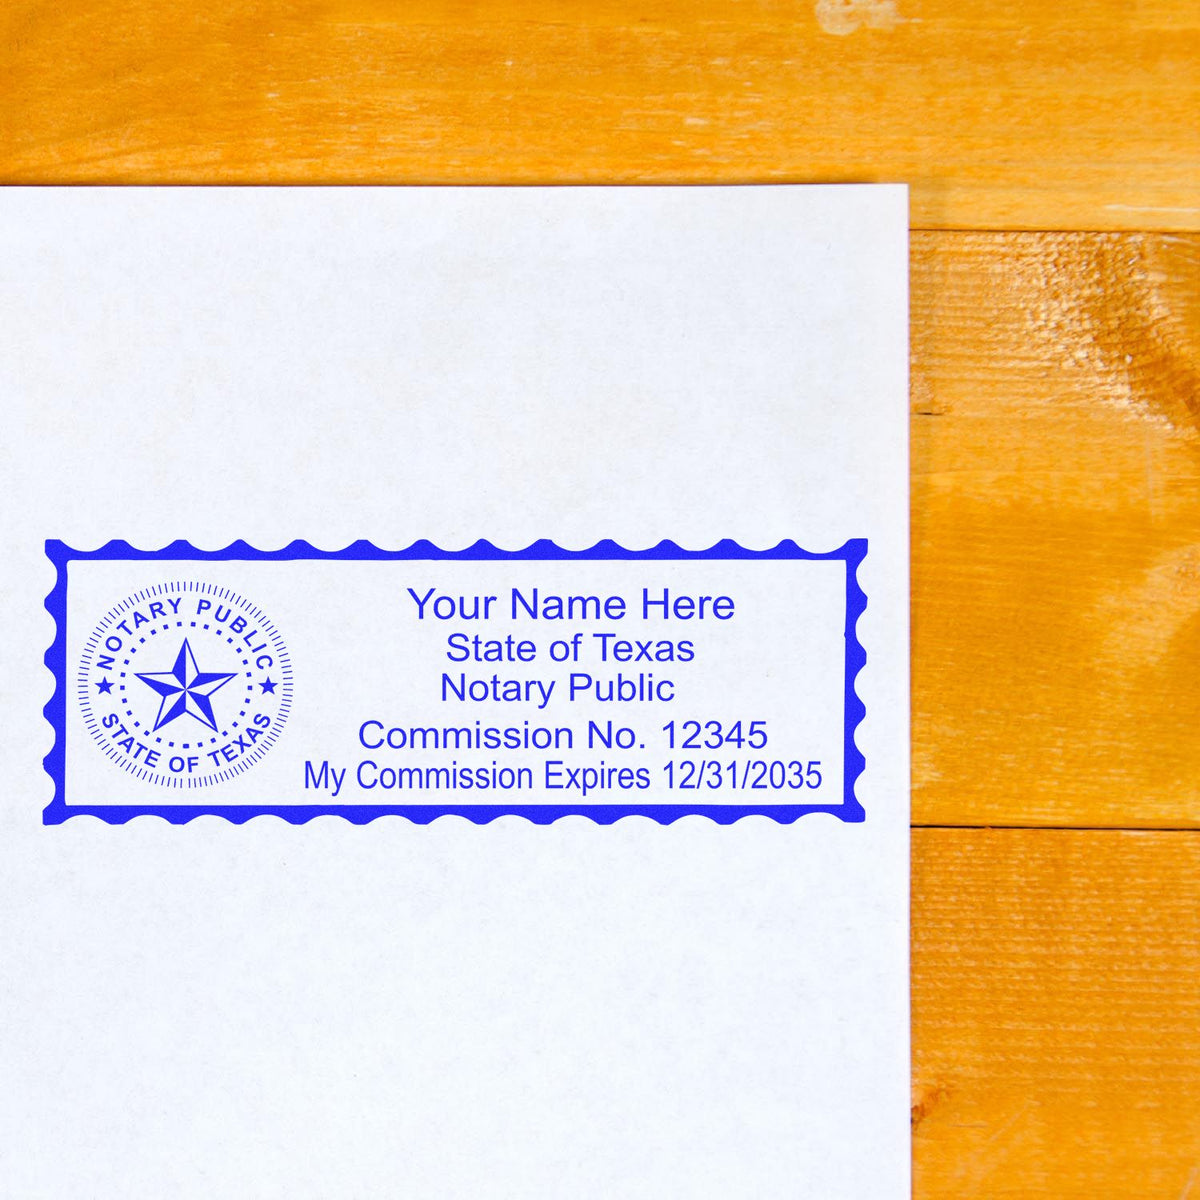 This paper is stamped with a sample imprint of the Wooden Handle Texas State Seal Notary Public Stamp, signifying its quality and reliability.